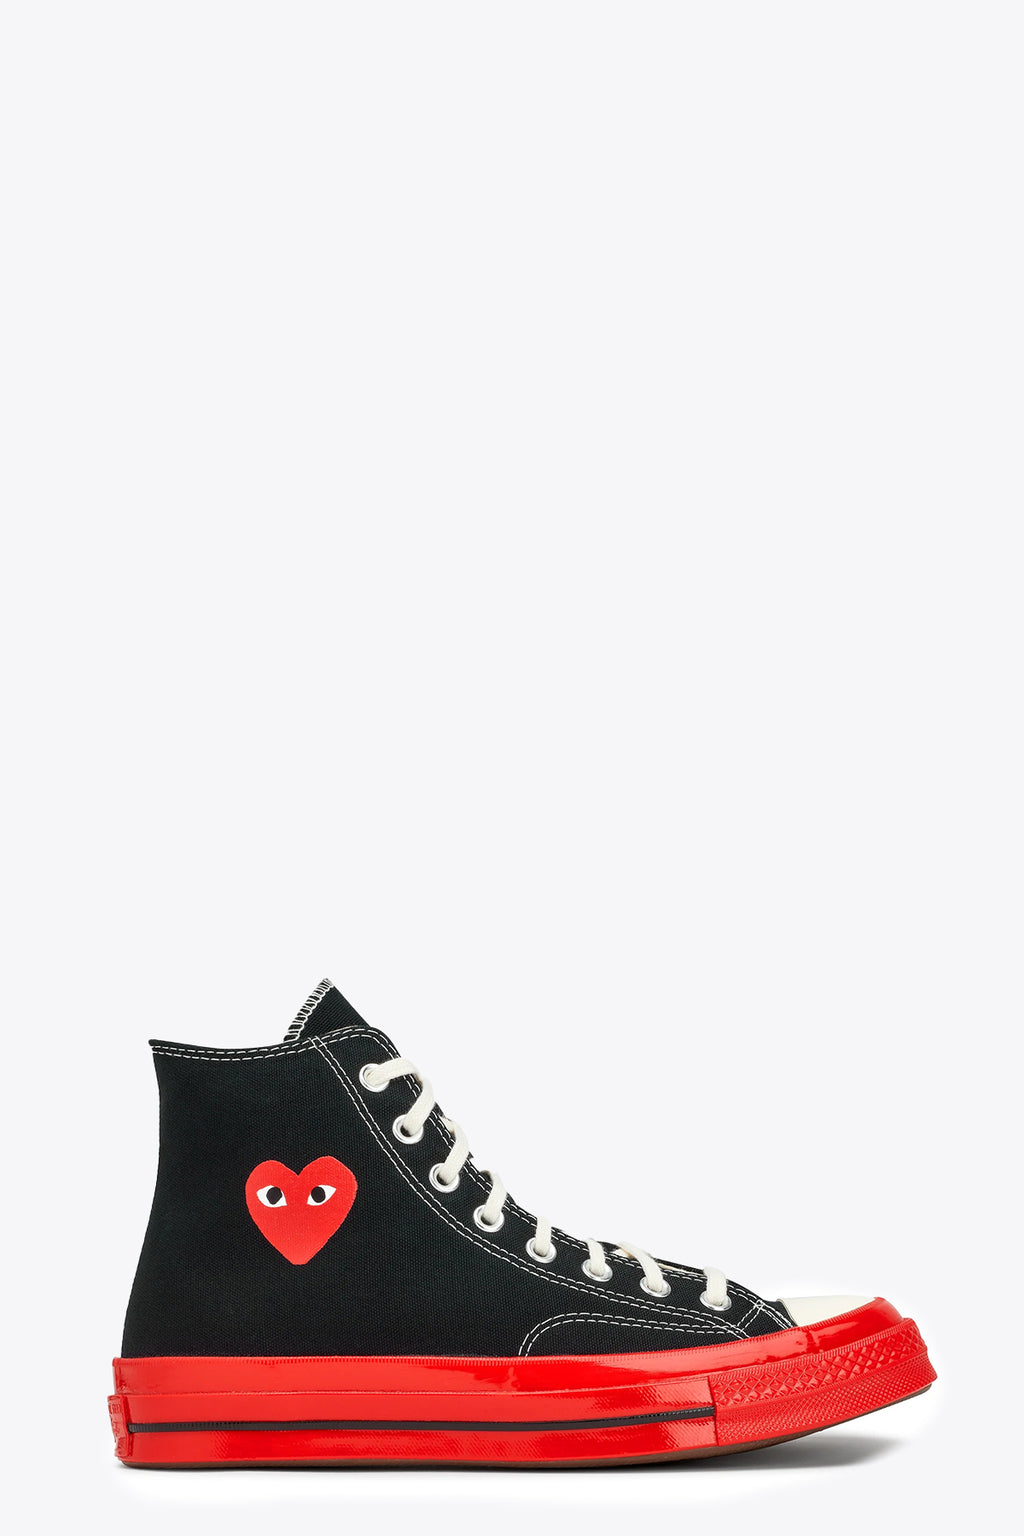 alt-image__Converse-collaboration-Chuck-Taylor-70's-black-canvas-sneaker-with-red-sole.